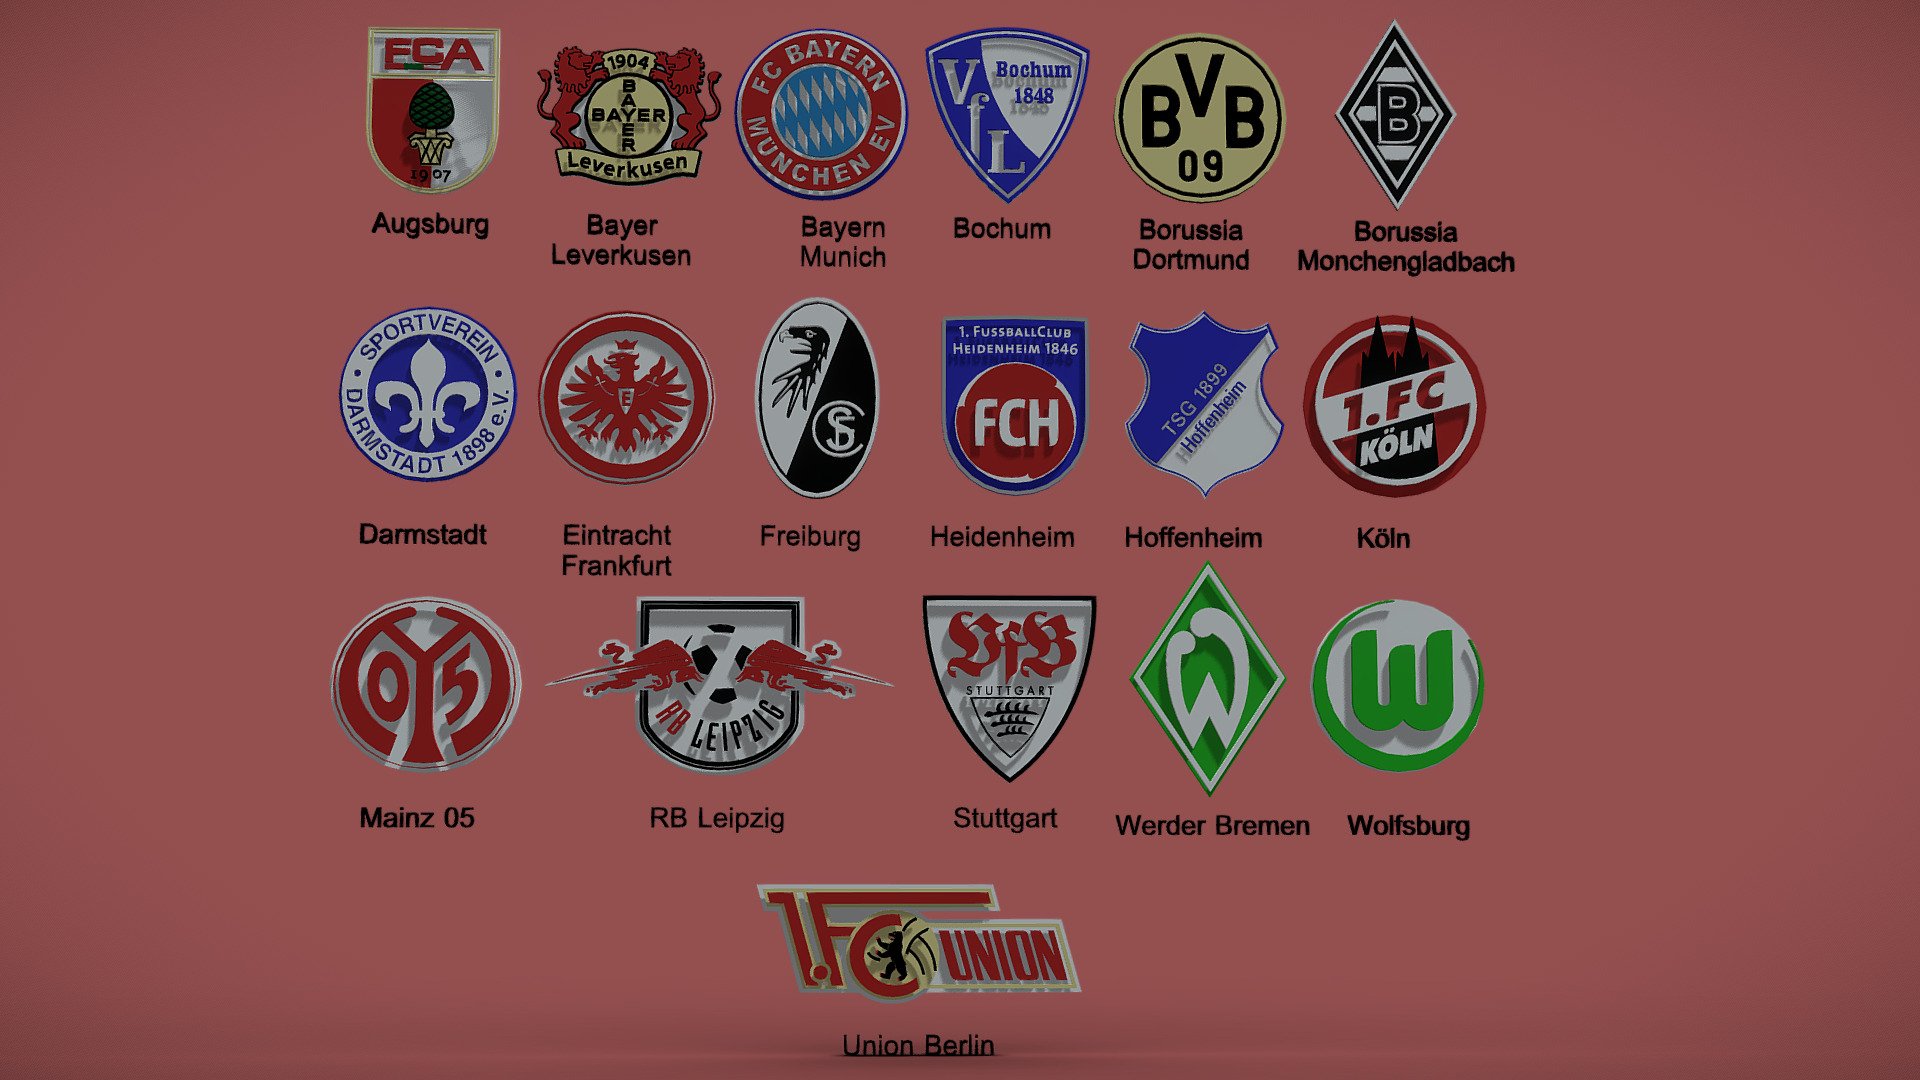 Bundesliga all logo teams printable and renderable

The Bundesliga is a professional association football league in Germany. 




18 Teams 

STL ready to print logos and keychan

Merged and Split by color versions

Each logo is 7cms but you are free to scale it

Splitted by colors version included

Keychan version for each team included 

Full renderable OBJ vertex color included

Zip file contains STL, OBJ, GLB, FBX and ilustrator format

If you have any questions please don t hesitate to contact me.
I will respond you ASAP.
I encourage you to check my other 3D models.

Teams:




Augsburg

Bayer Leverkusen

Bayern Munich

Bochum

Borussia Dortmund

Borussia Monchengladbach

Darmstadt 98

Eintracht Frankfurt

Freiburg

Heidenheim

Hoffenheim 1899

Köln

Mainz 05

RB Leipzig

Stuttgart

Union Berlin

Werder Bremen

Wolfsburg
 - Bundesliga all logo teams printable and pbr - Buy Royalty Free 3D model by generalista3D (@adelin) 3d model